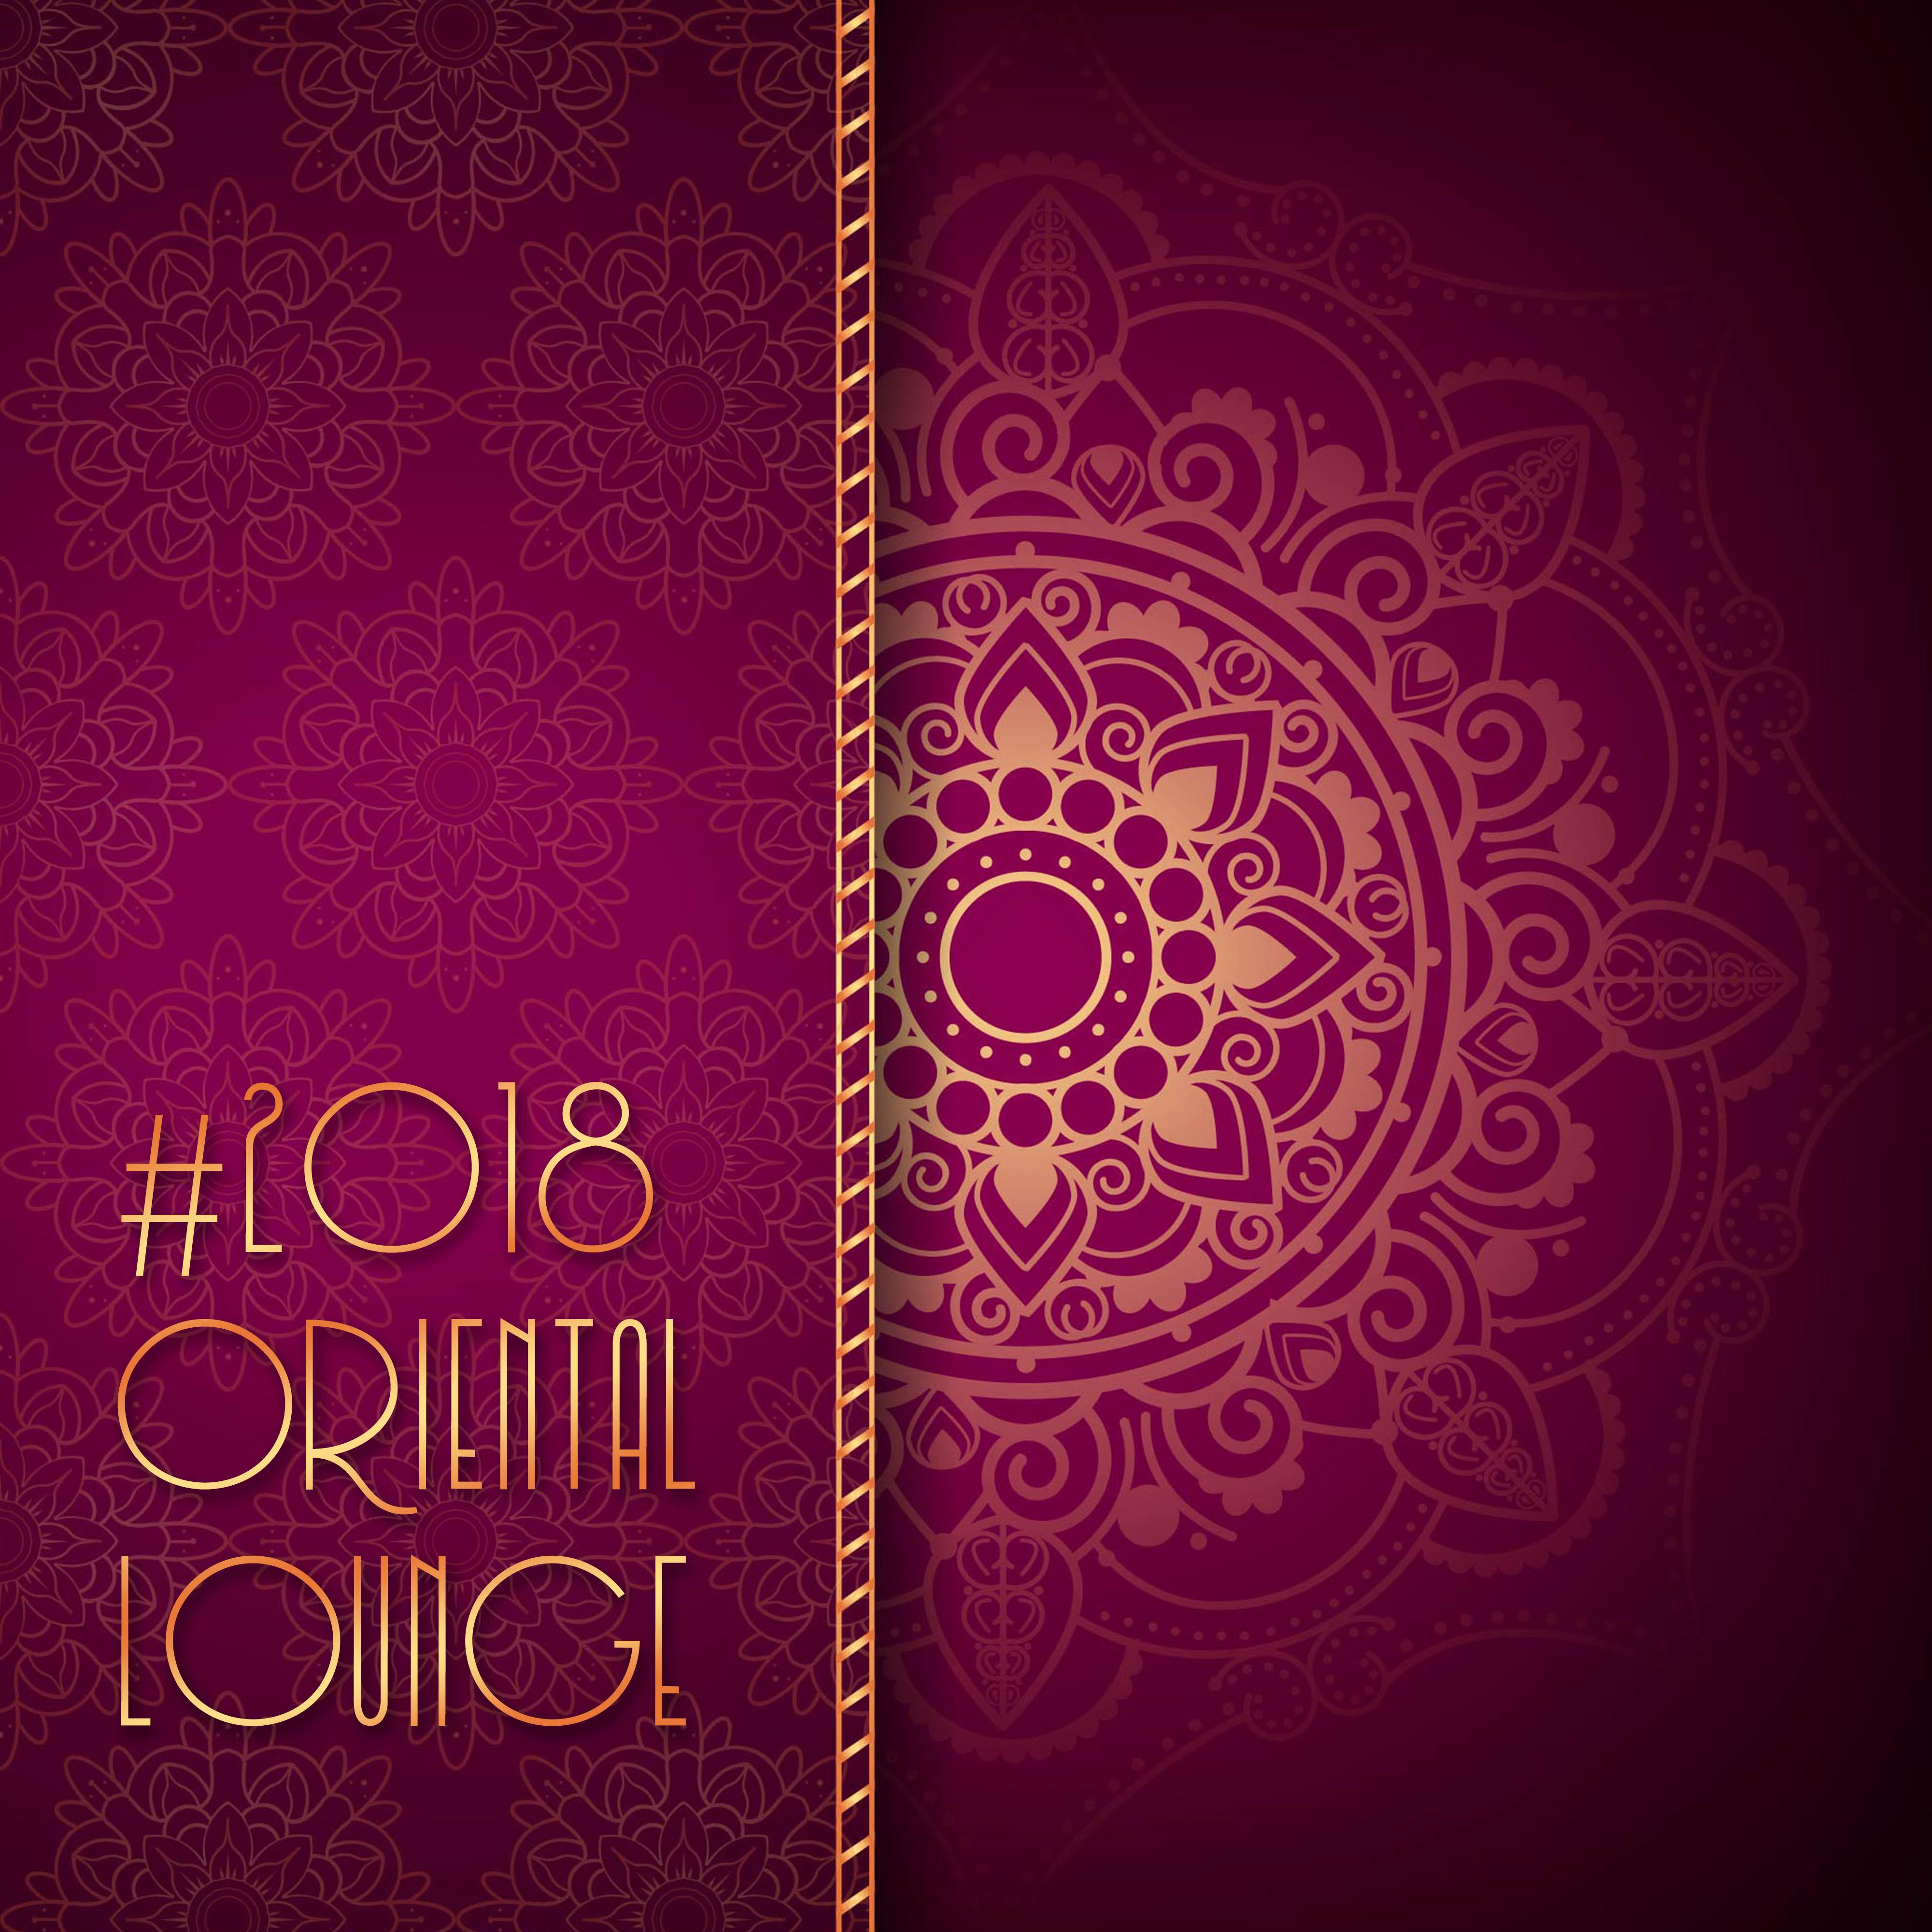 #2018 Oriental Lounge – India Chillout